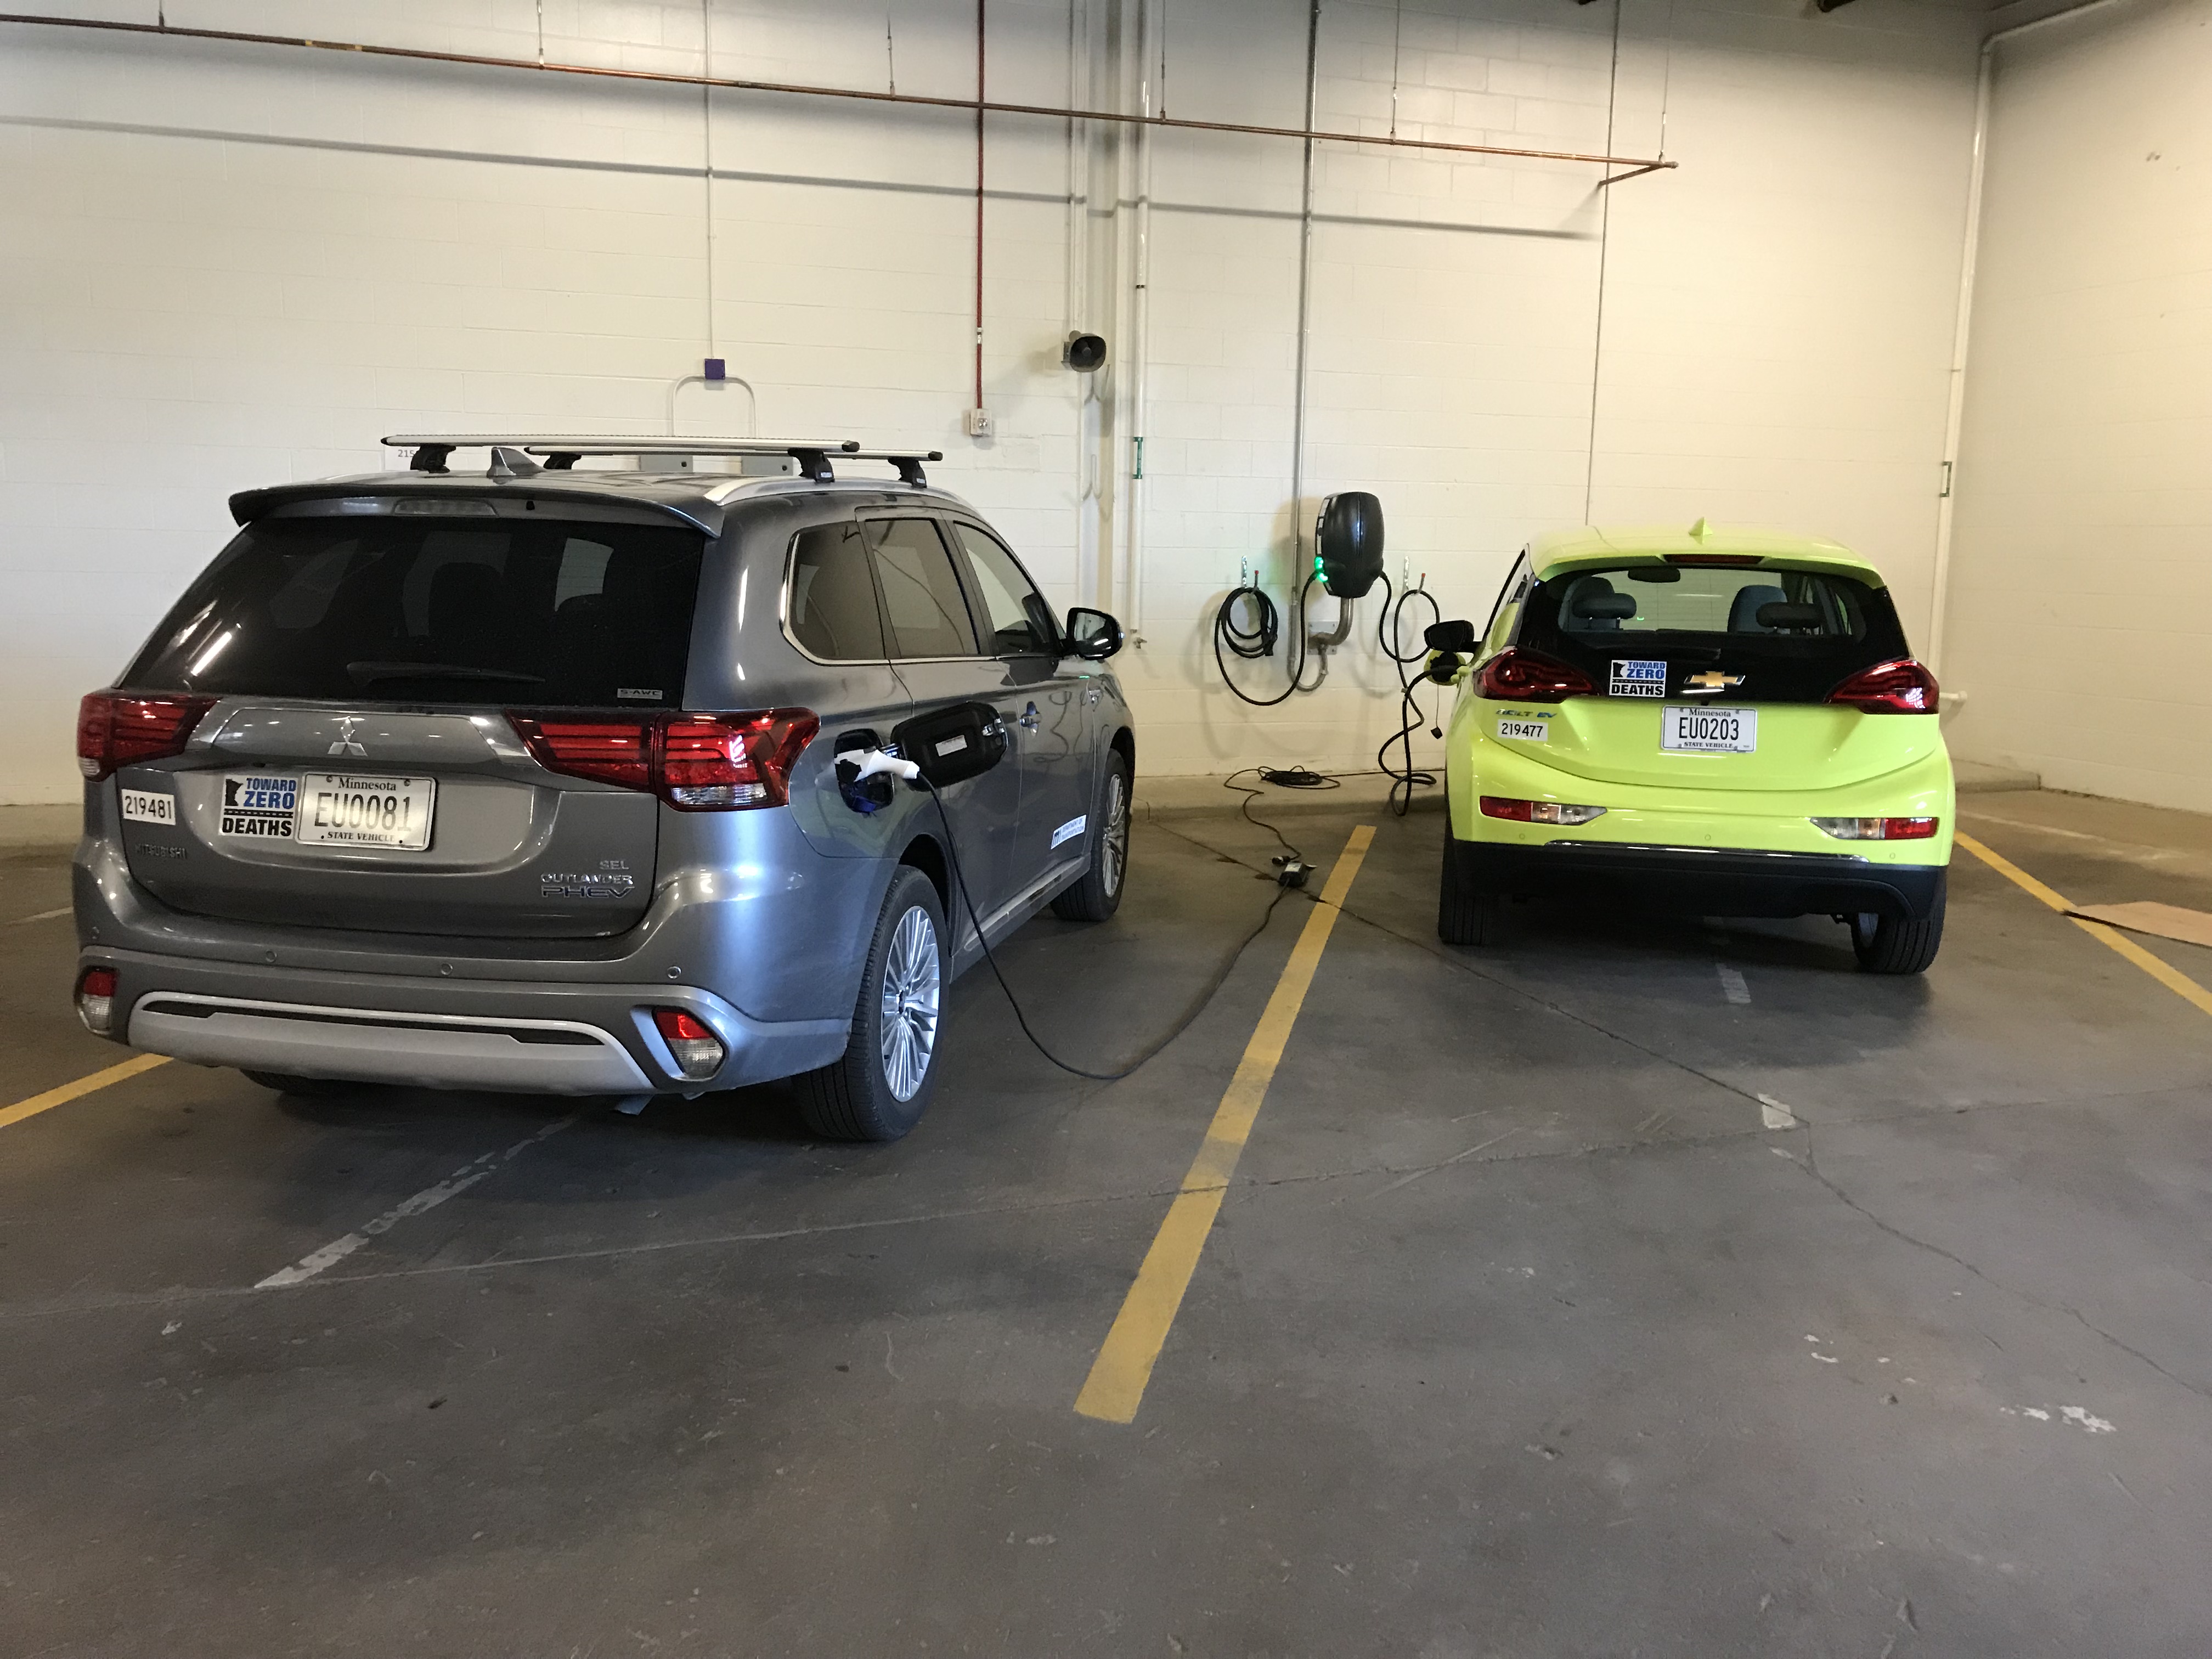 Two cars parked in a garage, with both plugged into a wall mounted charger